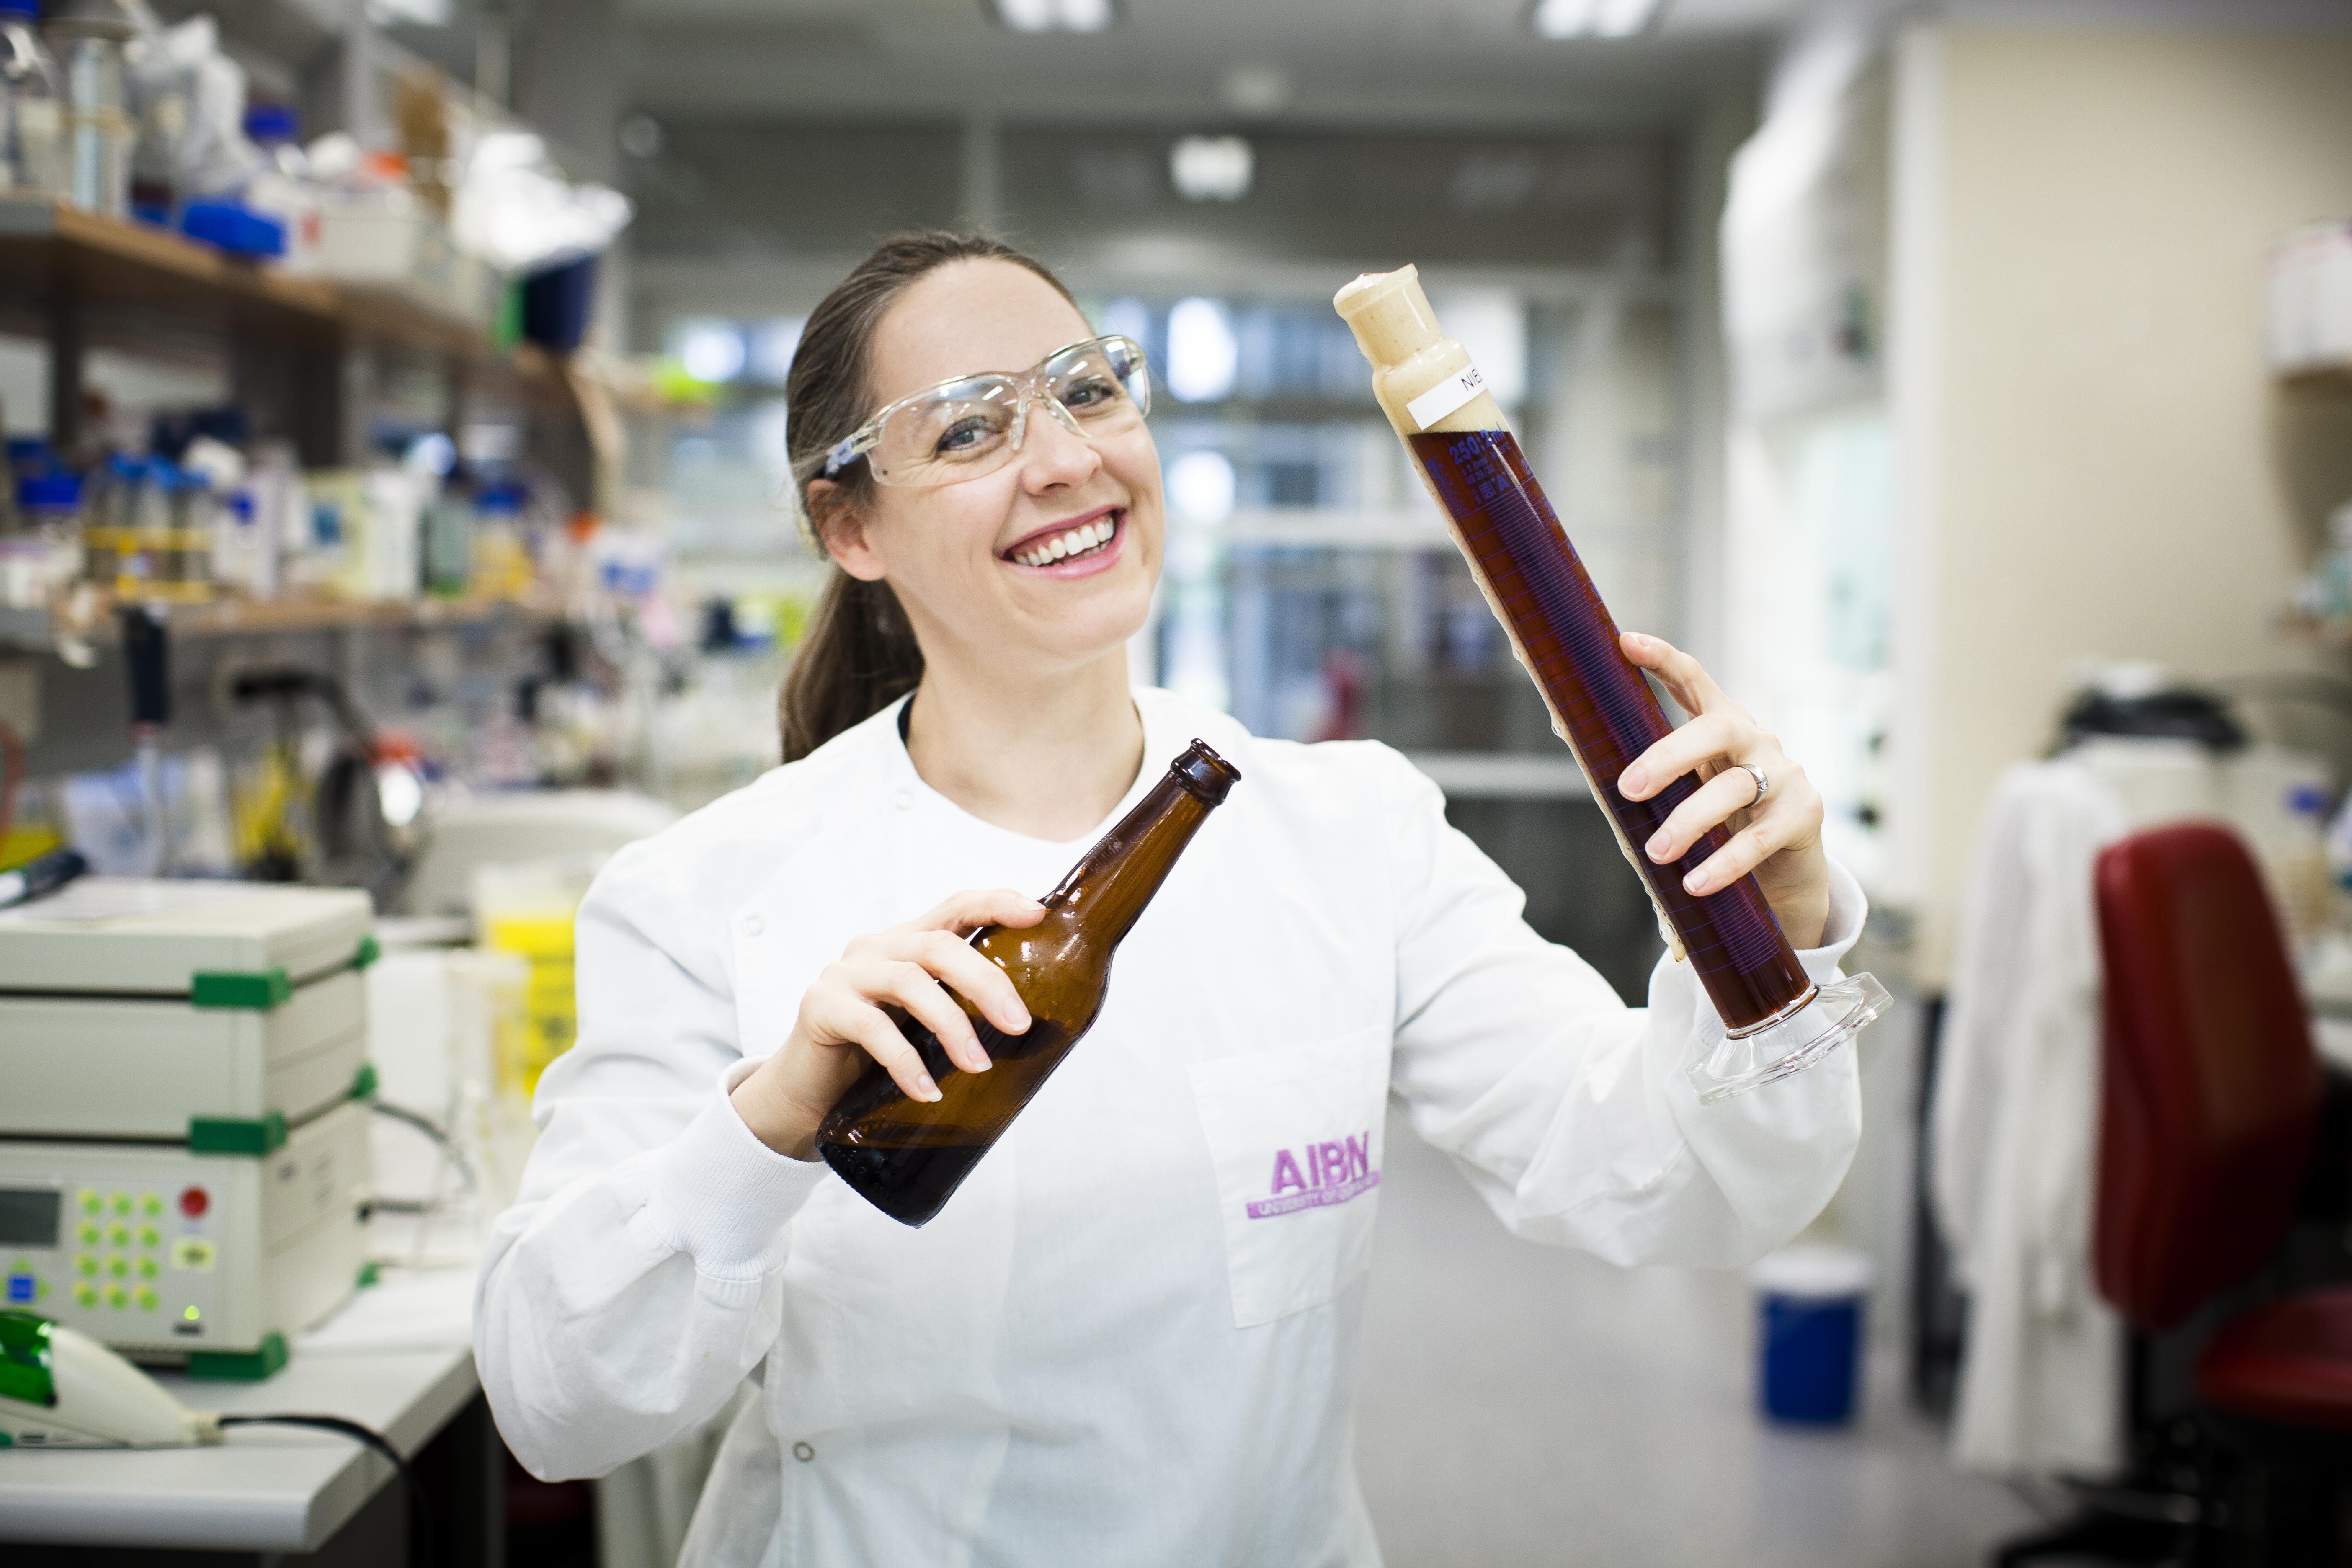 Dr Claudia Vickers from UQ's Australian Institute for Bioengineering and Nanotechnology will talk about 'The science of beer' at the Queensland launch of National Science Week